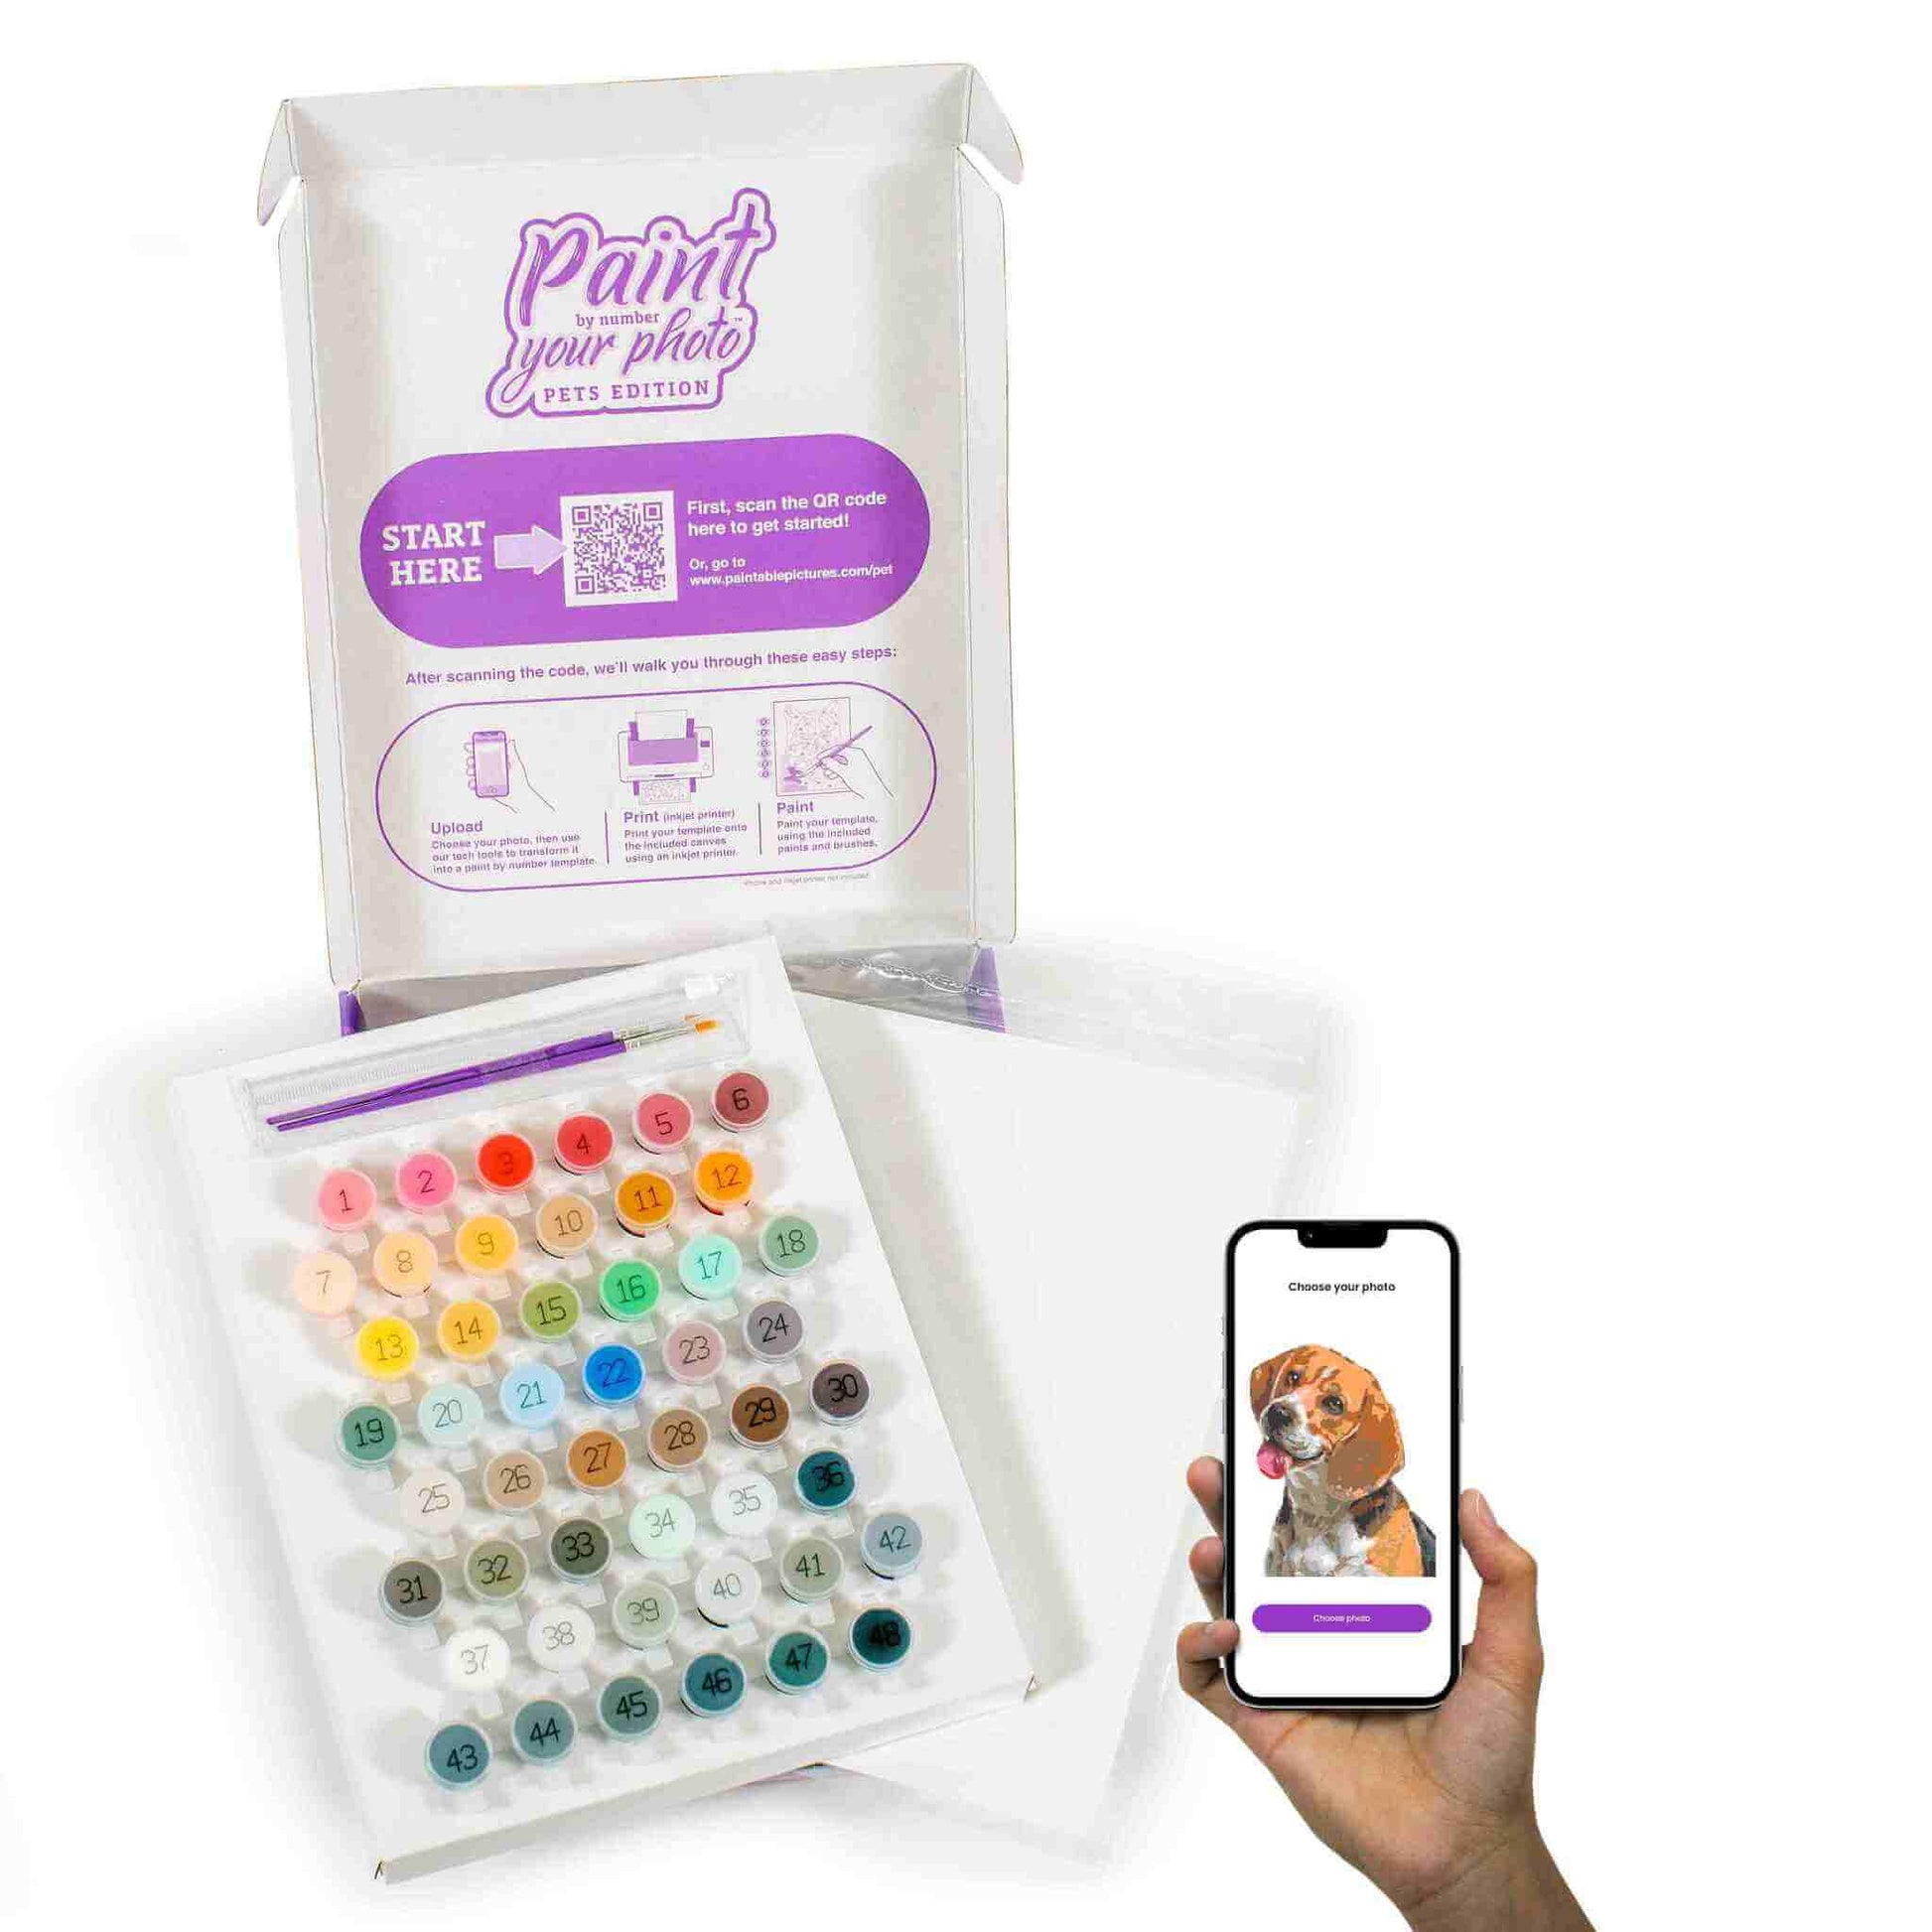 A 'Paint Your Photo: Pets Edition' custom paint by number kit, showing an open box with printed instructions and a QR code. Inside, there's a palette of numbered paint pots, brushes, and a smartphone displaying a pet photo ready to be painted.